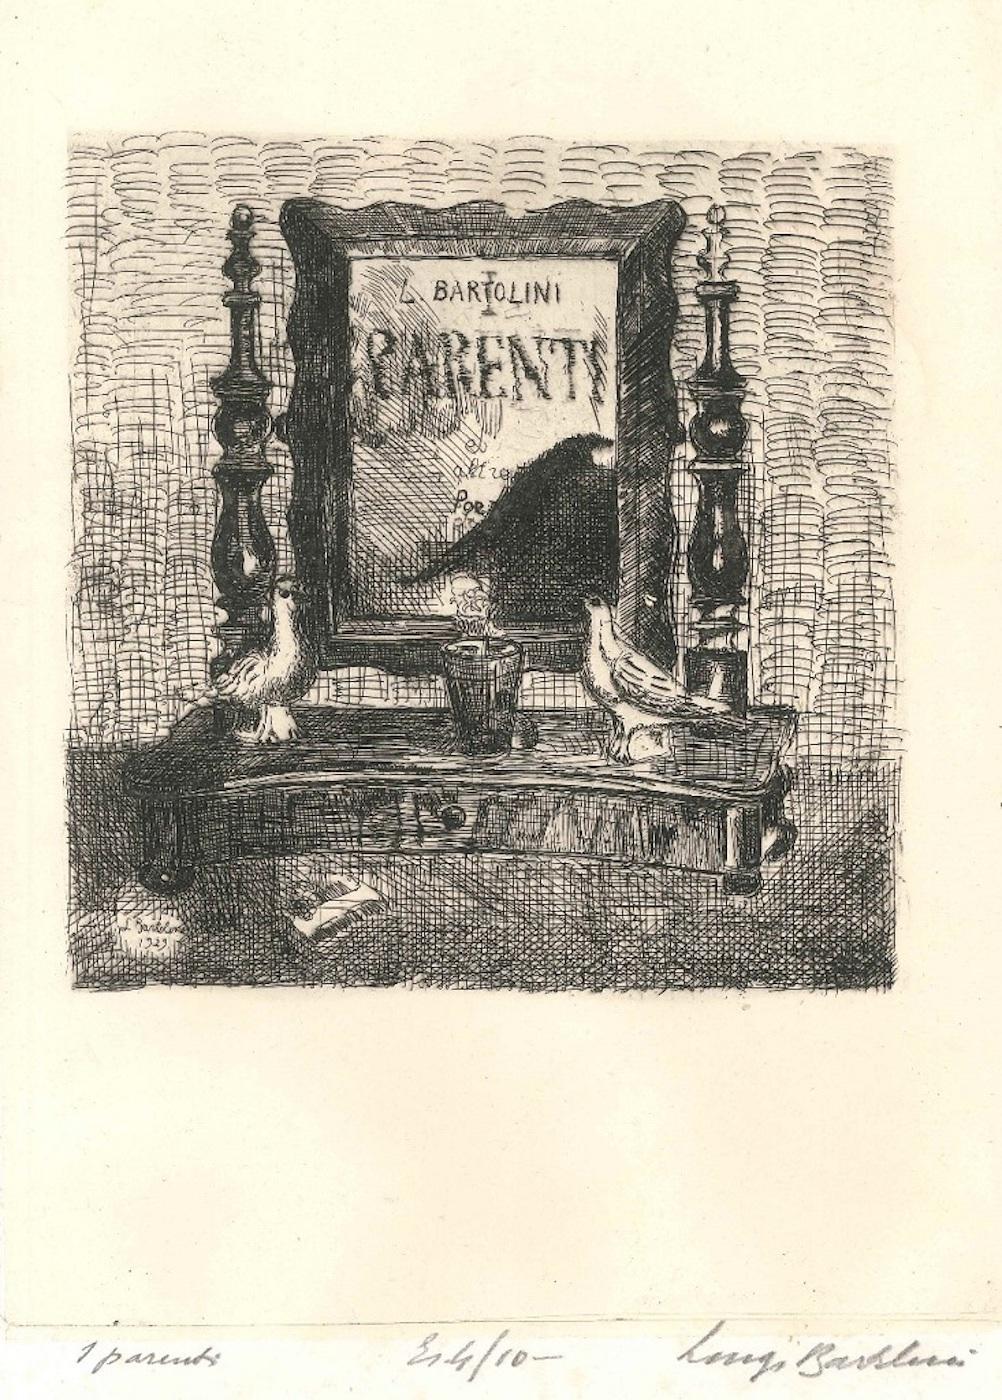 Image dimensions: 24 x 18 cm.

I parenti is an original artwork realized by Luigi Bartolini in 1929.

Original etching applied on ivory paper.

Hand-signed, numbered and titled in pencil on the lower part: "I parenti, es. 4/10 Luigi Bartolini".